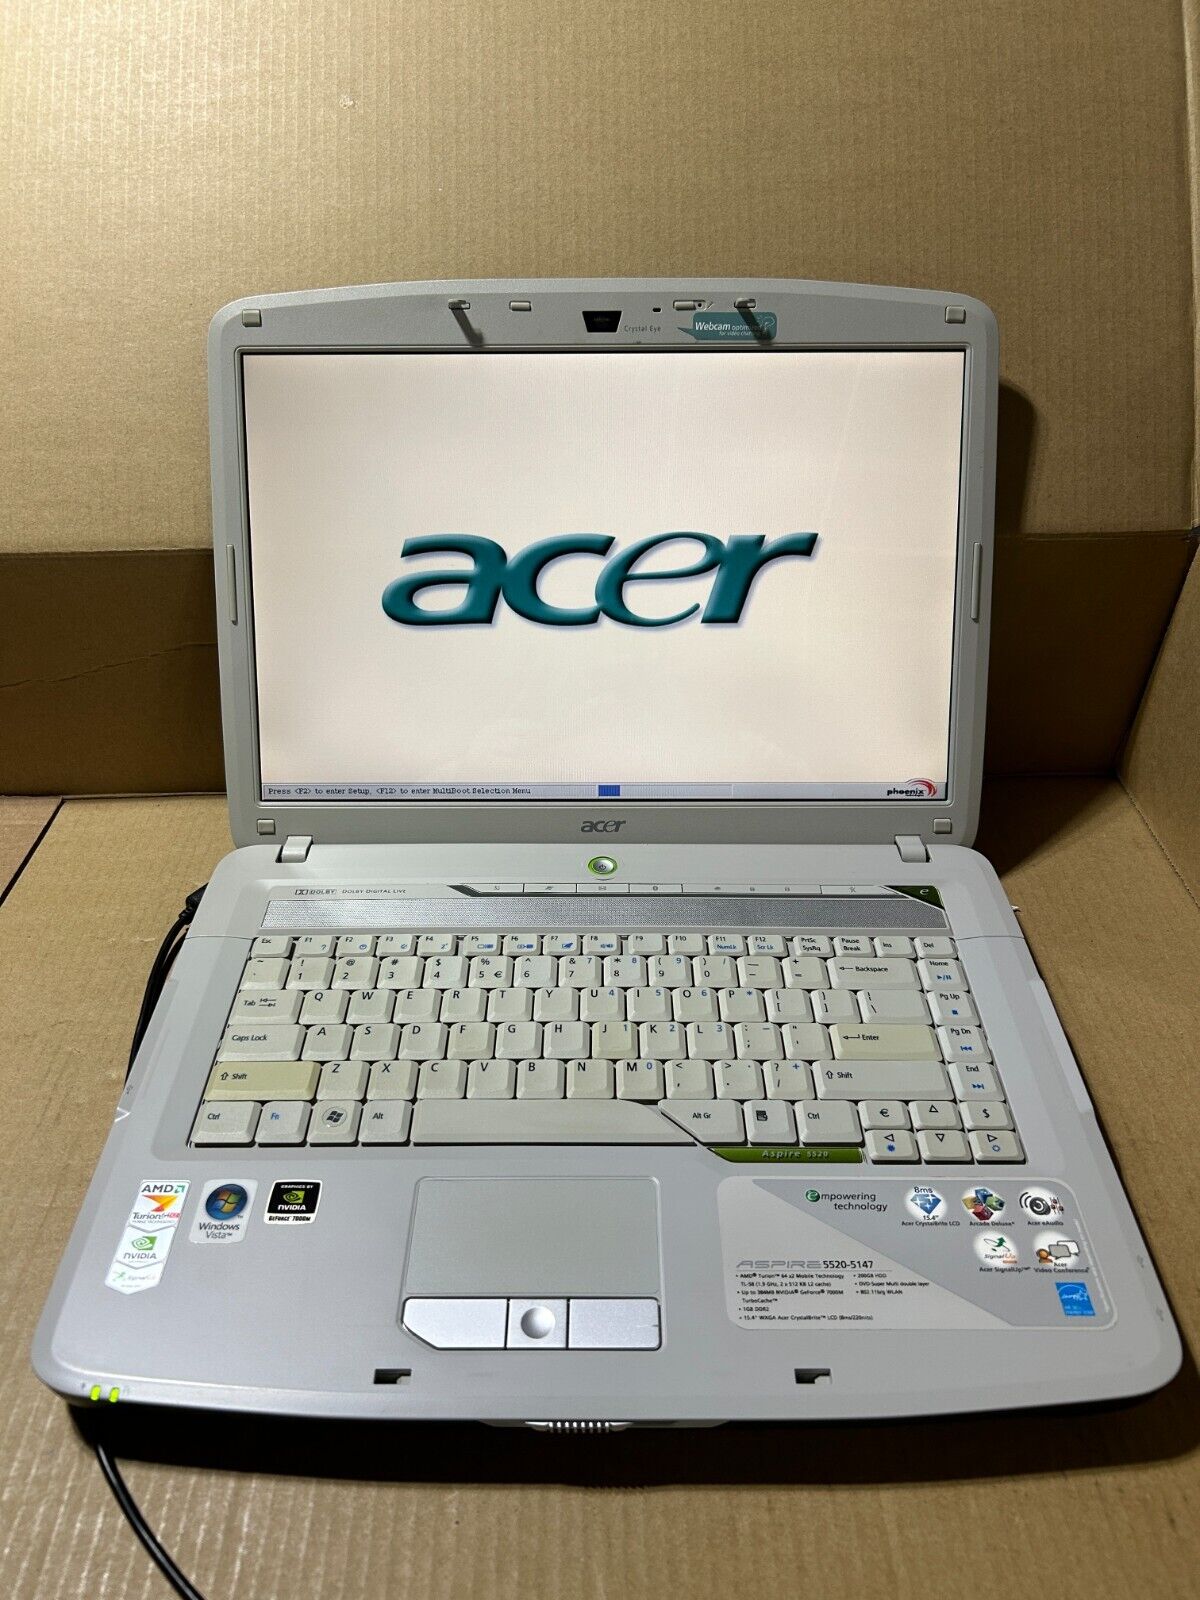 Used - Tested - Acer Aspire 5520-5147 Series Laptop - 4GB - 500GB - Win 10 Home